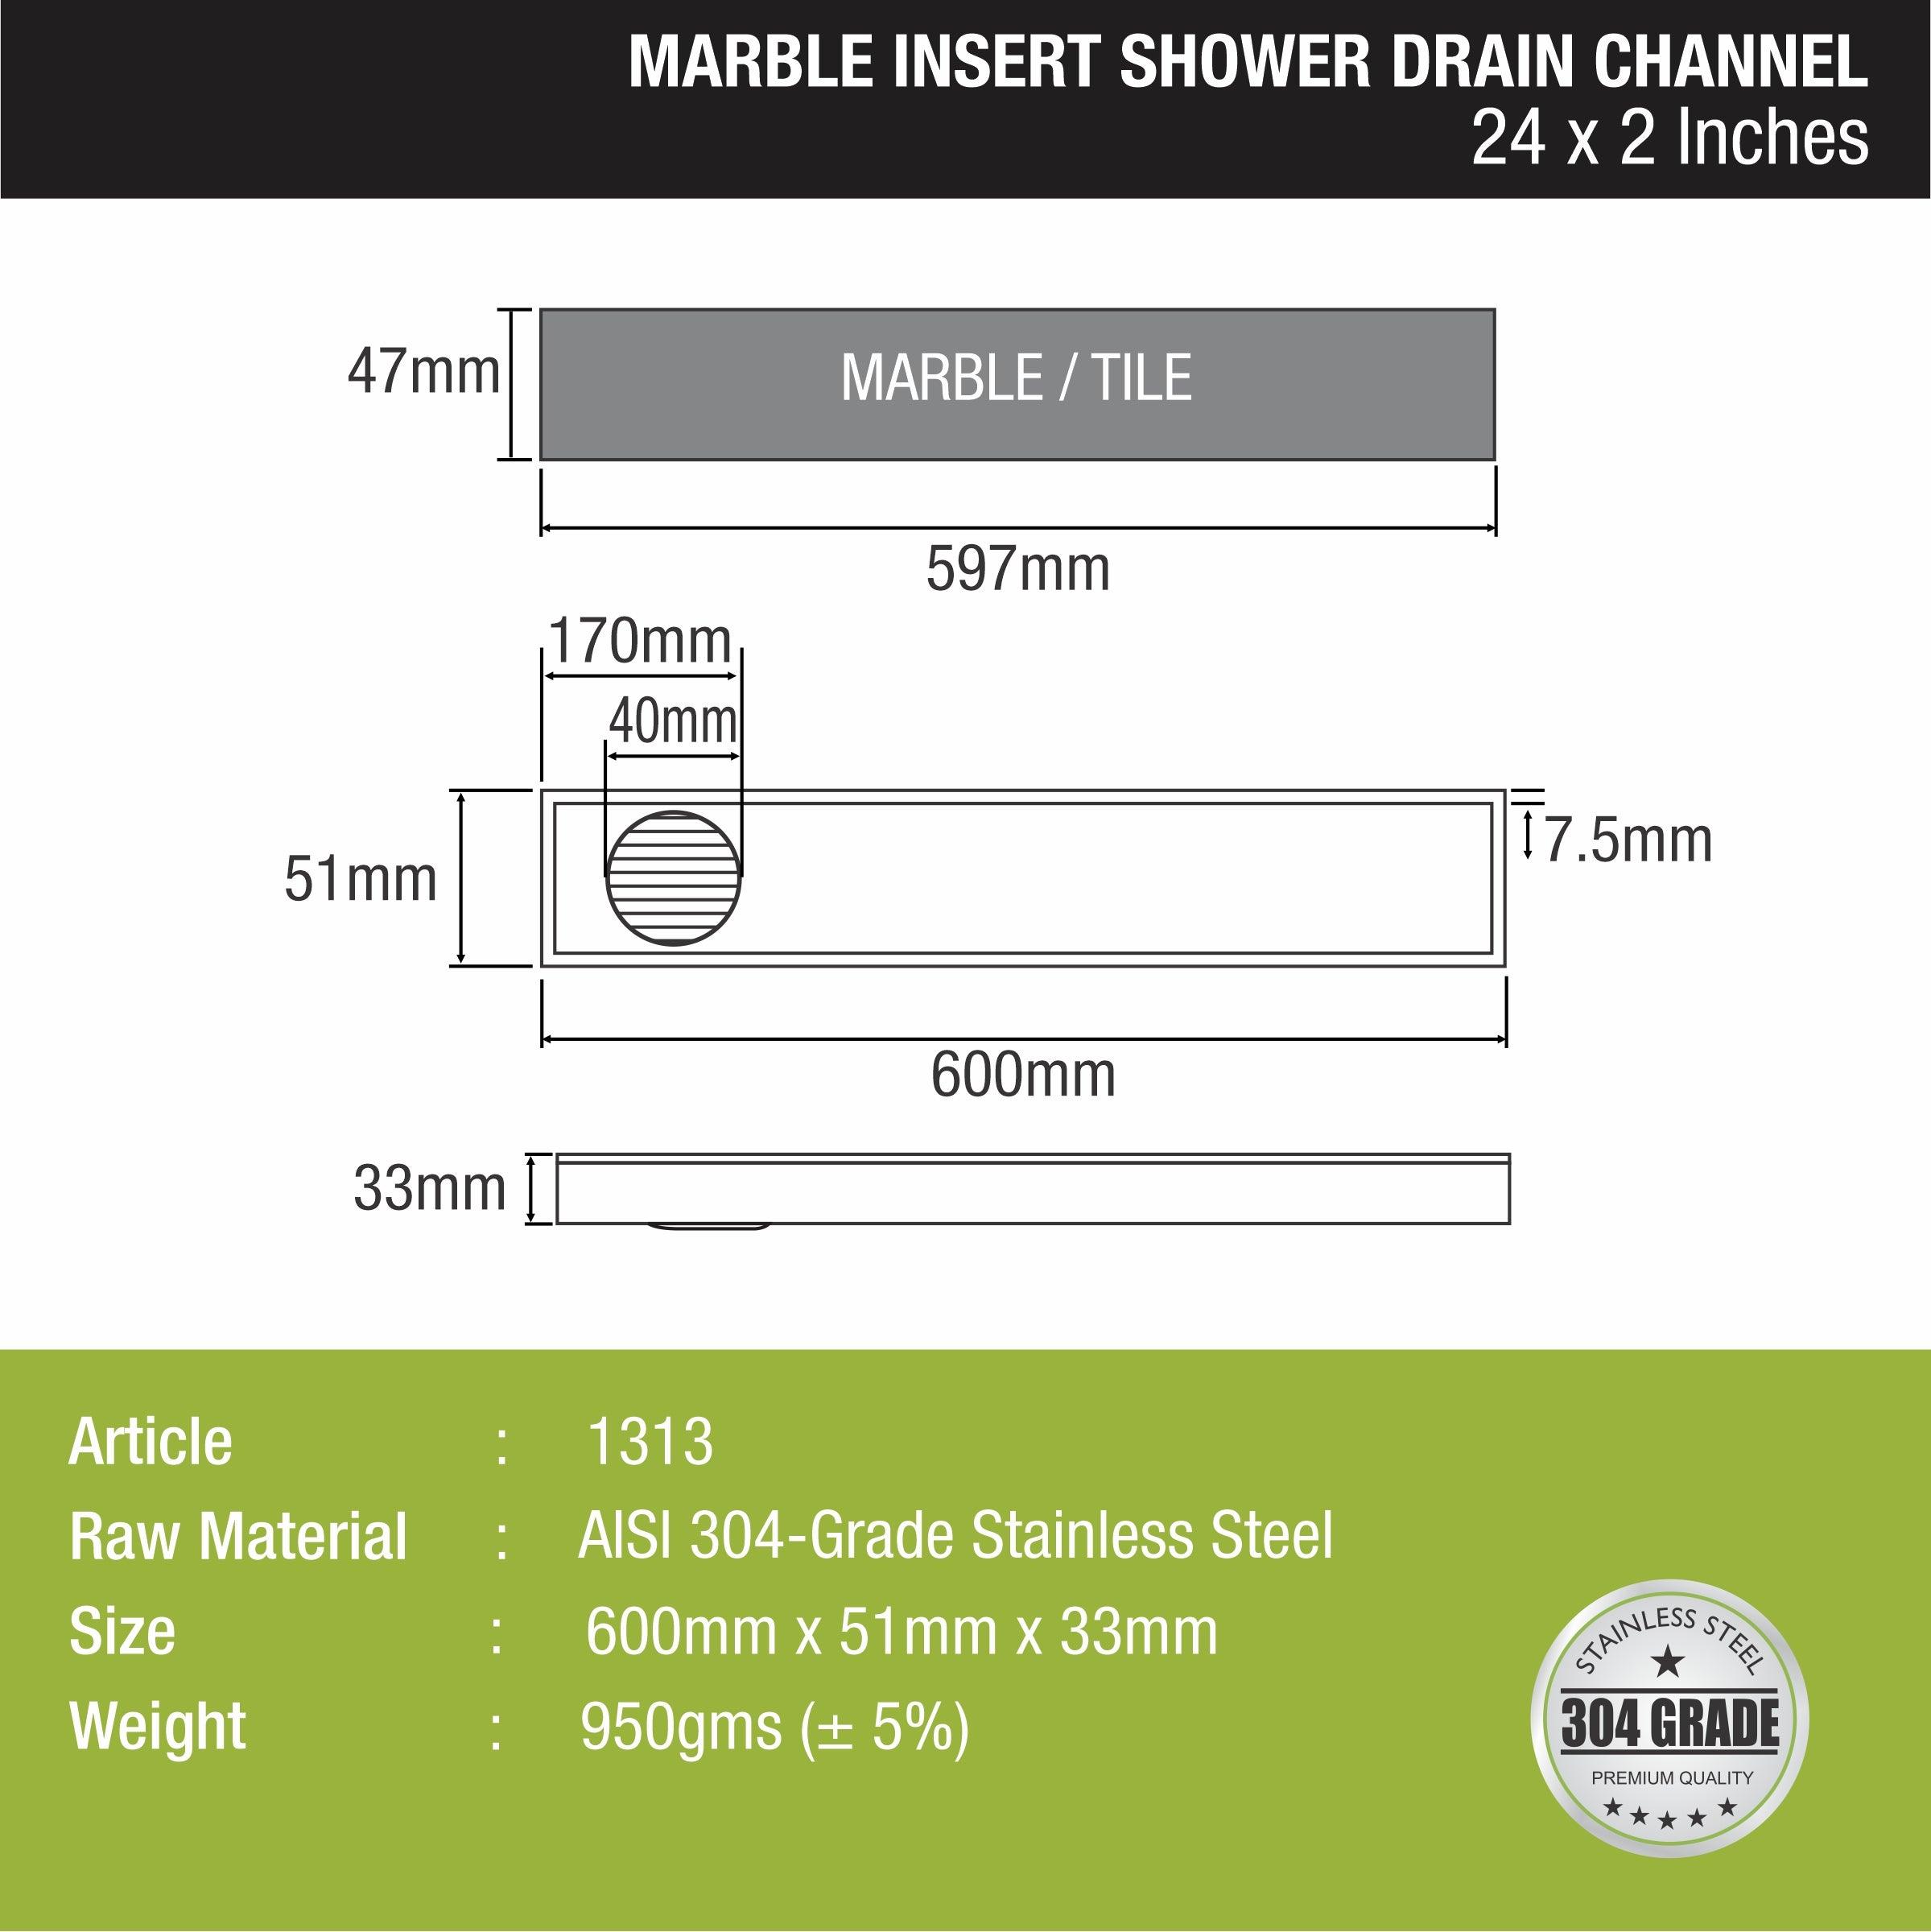 Marble Insert Shower Drain Channel (24 x 2 Inches) sizes and dimensions